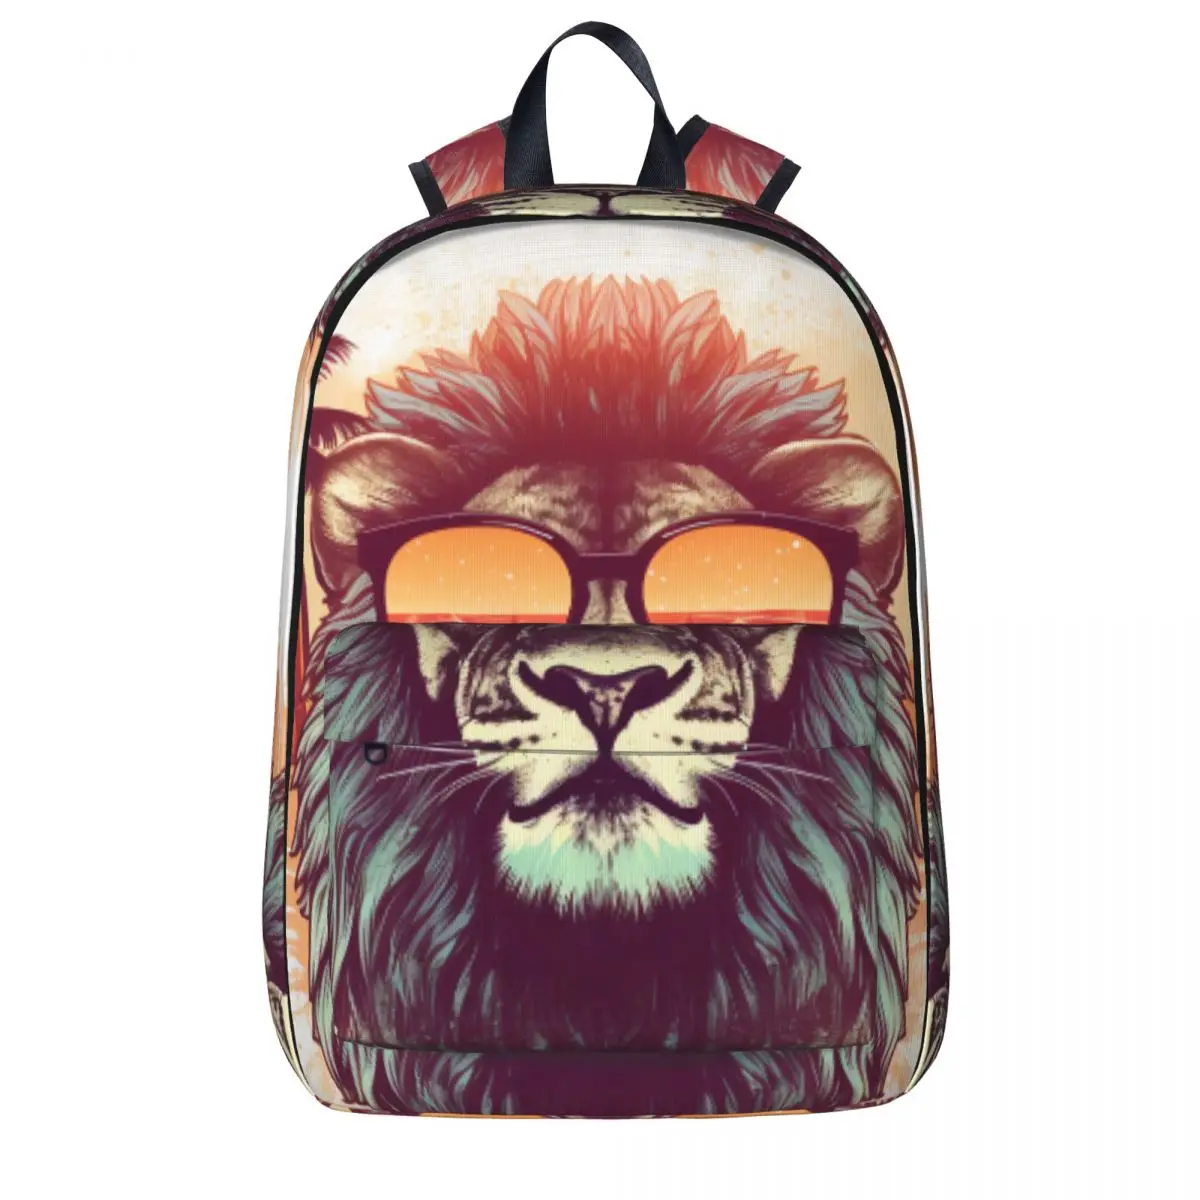 

Lion Backpack Animals With Sunglasses Sunset Retro Teen Polyester Travel Backpacks Large Kawaii High School Bags Rucksack